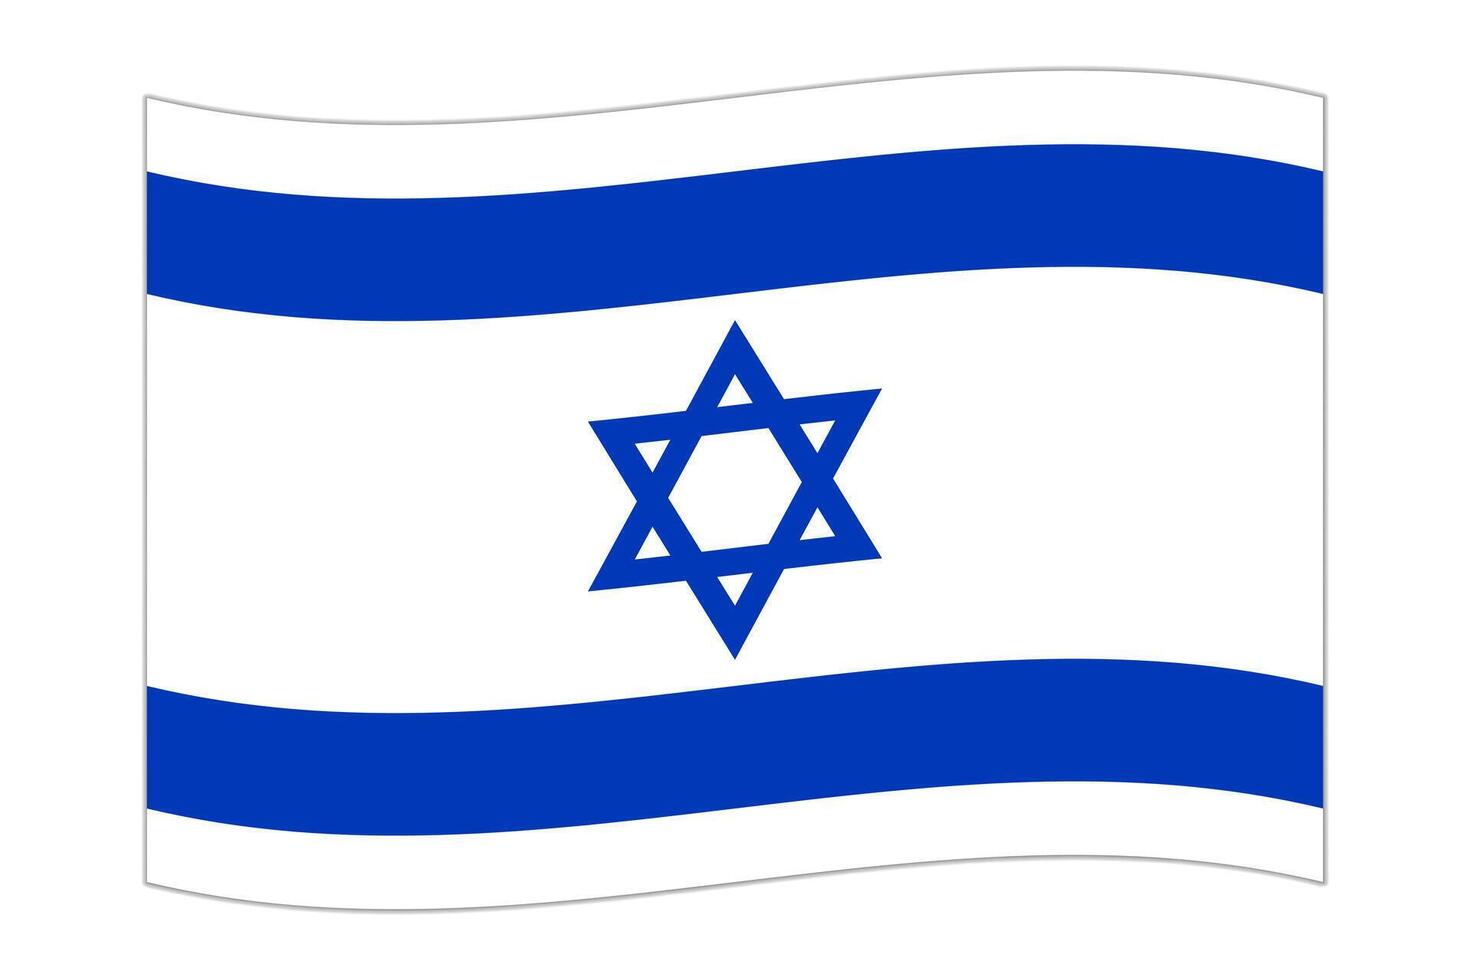 Waving flag of the country Israel. Vector illustration.